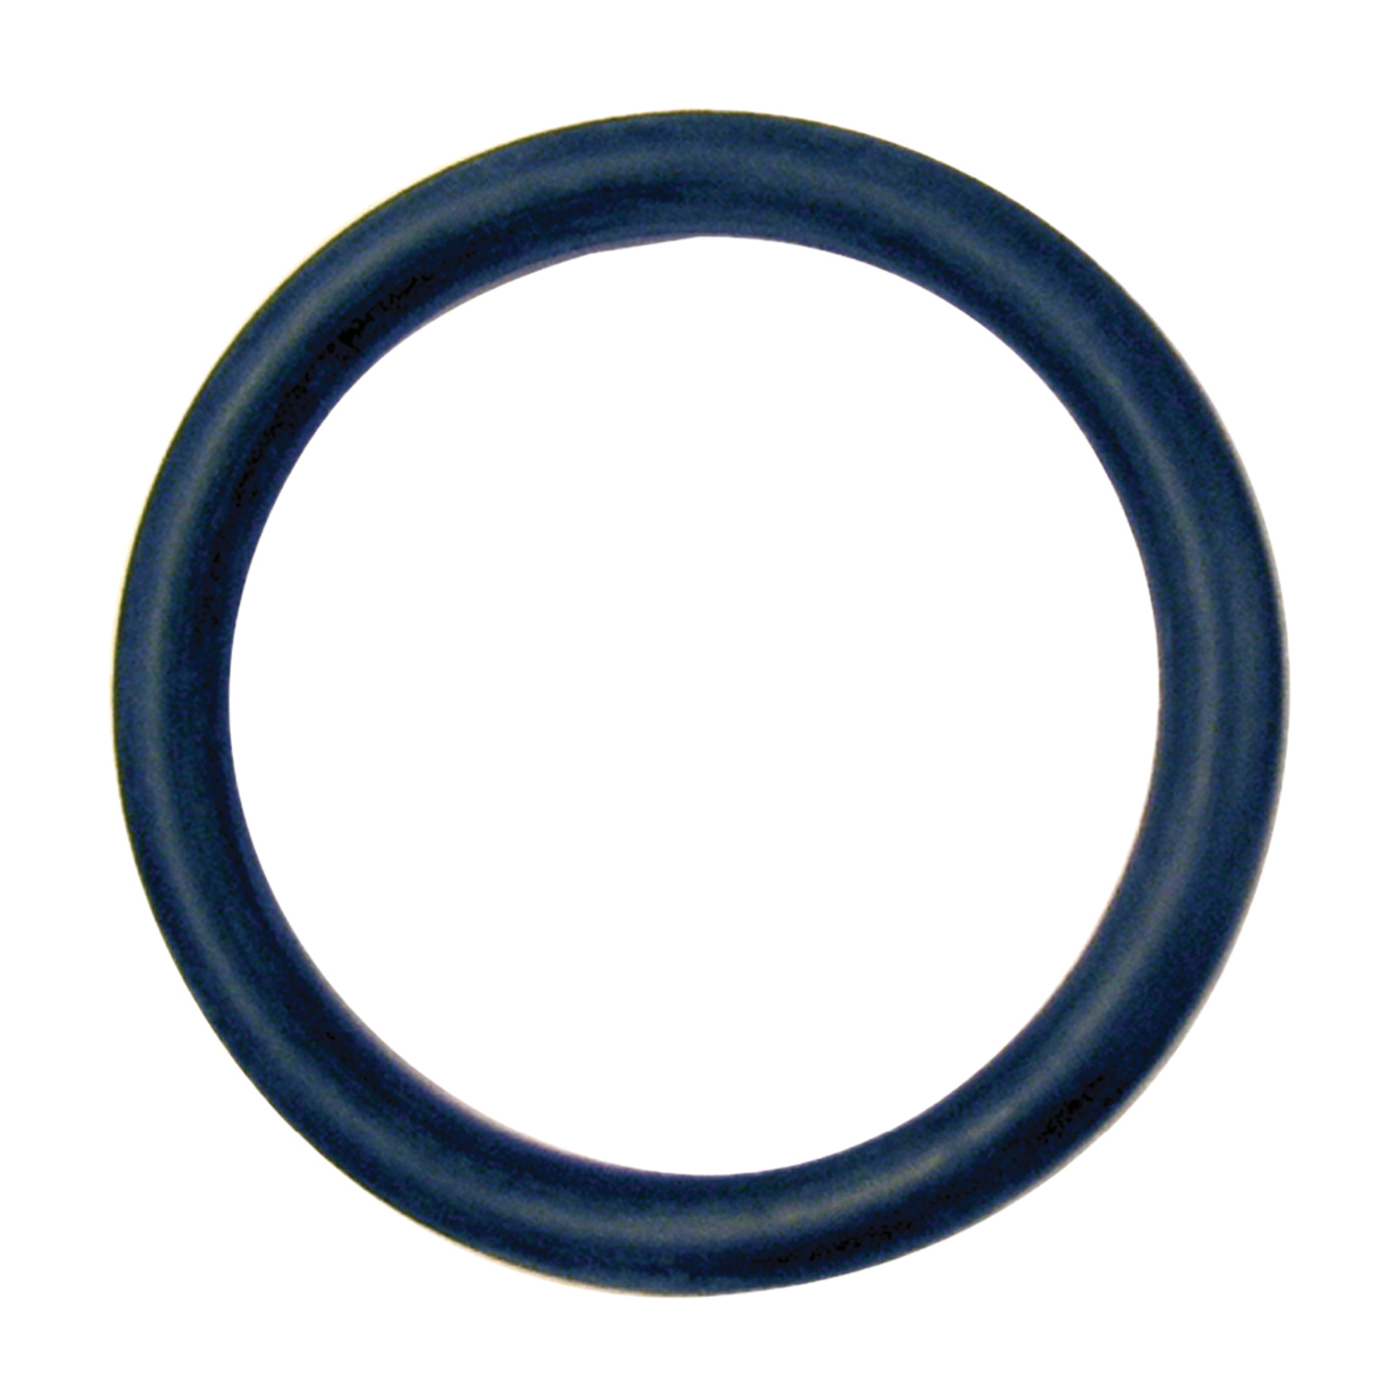 780050 Faucet O-Ring, 1-1/16 in ID x 1-3/16 in OD Dia, 1/16 in Thick